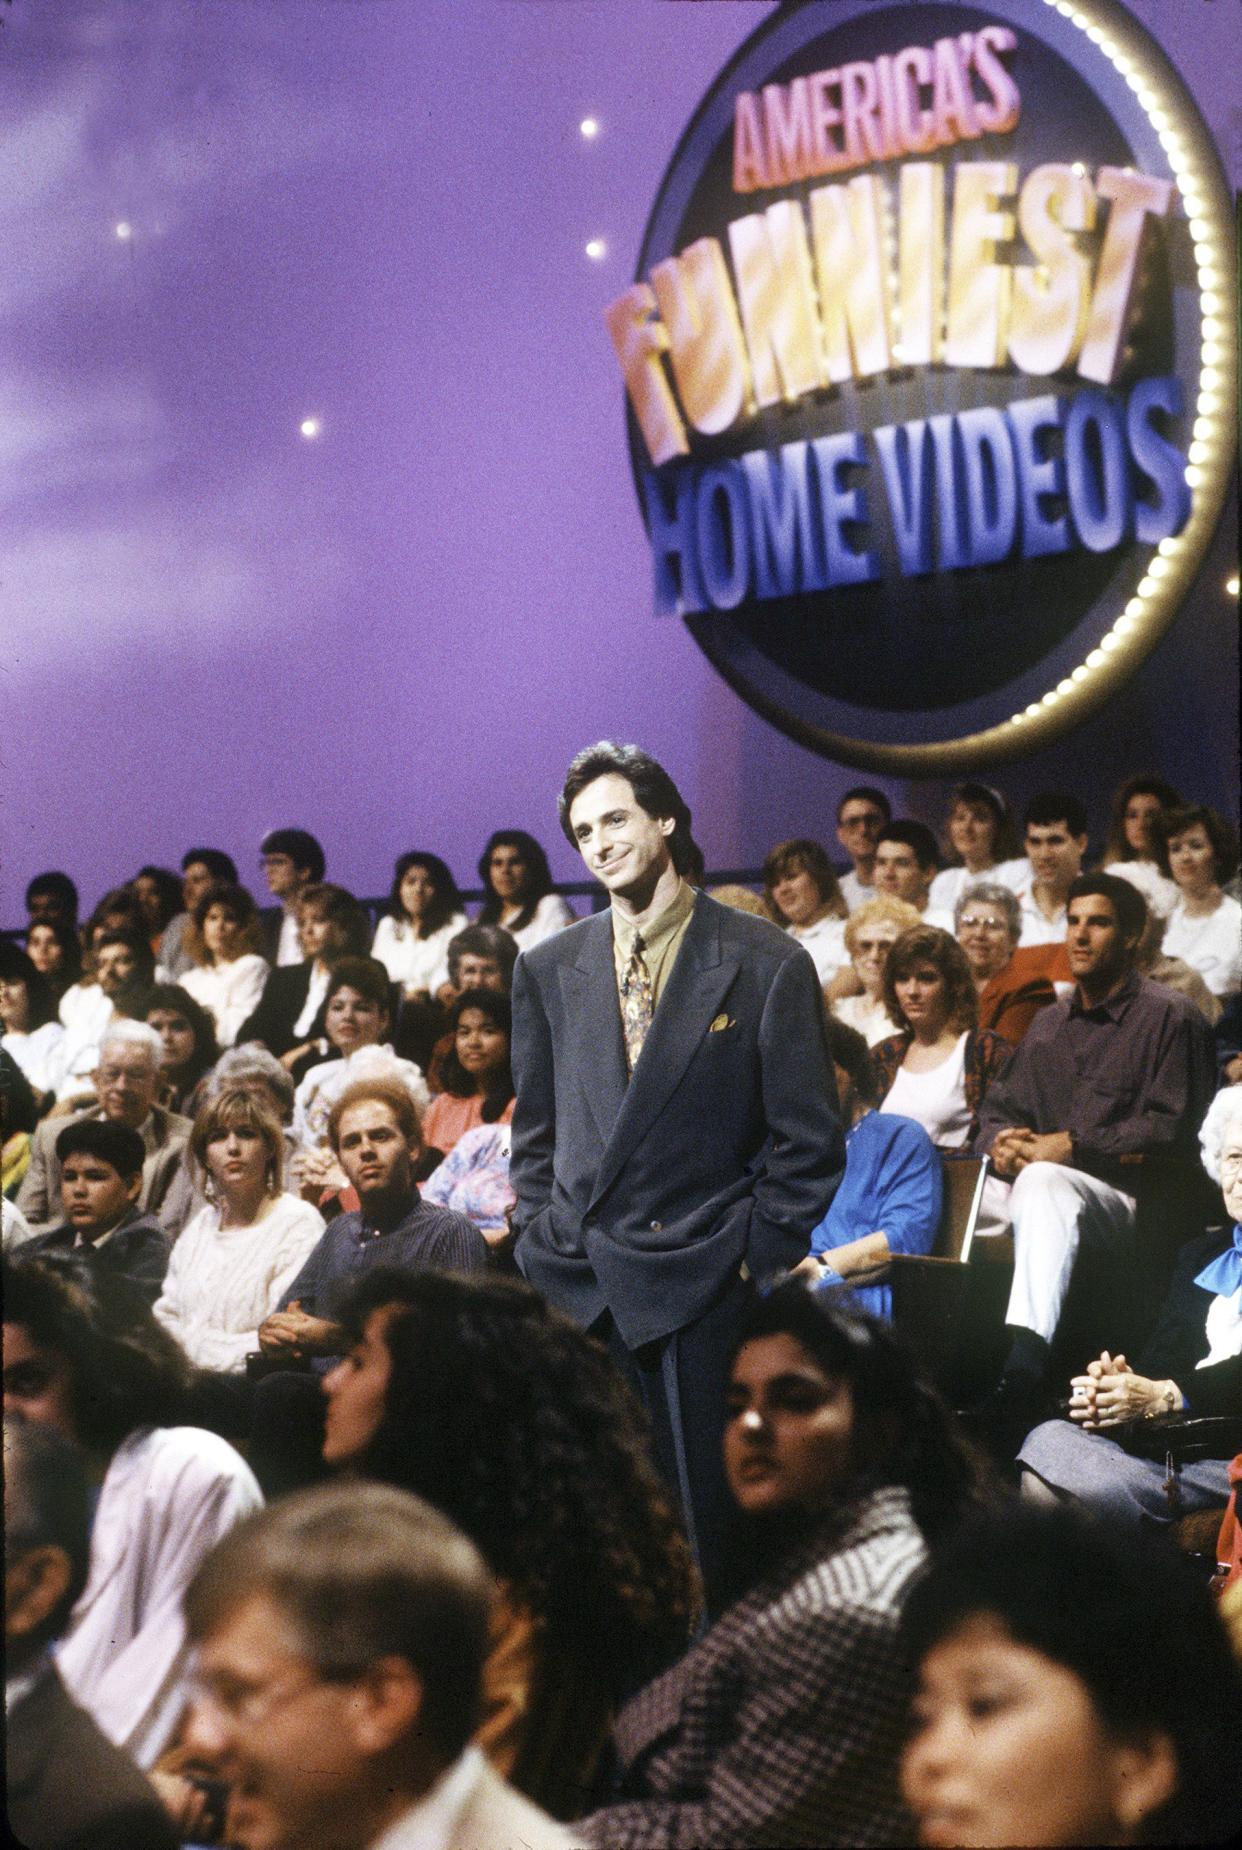 Host Bob Saget is seen during an episode of "America's Funniest Home Videos," in which hilarious events captured by camcorders were viewed by the studio audience and voted as the best for cash prizes, on March 5, 1990.